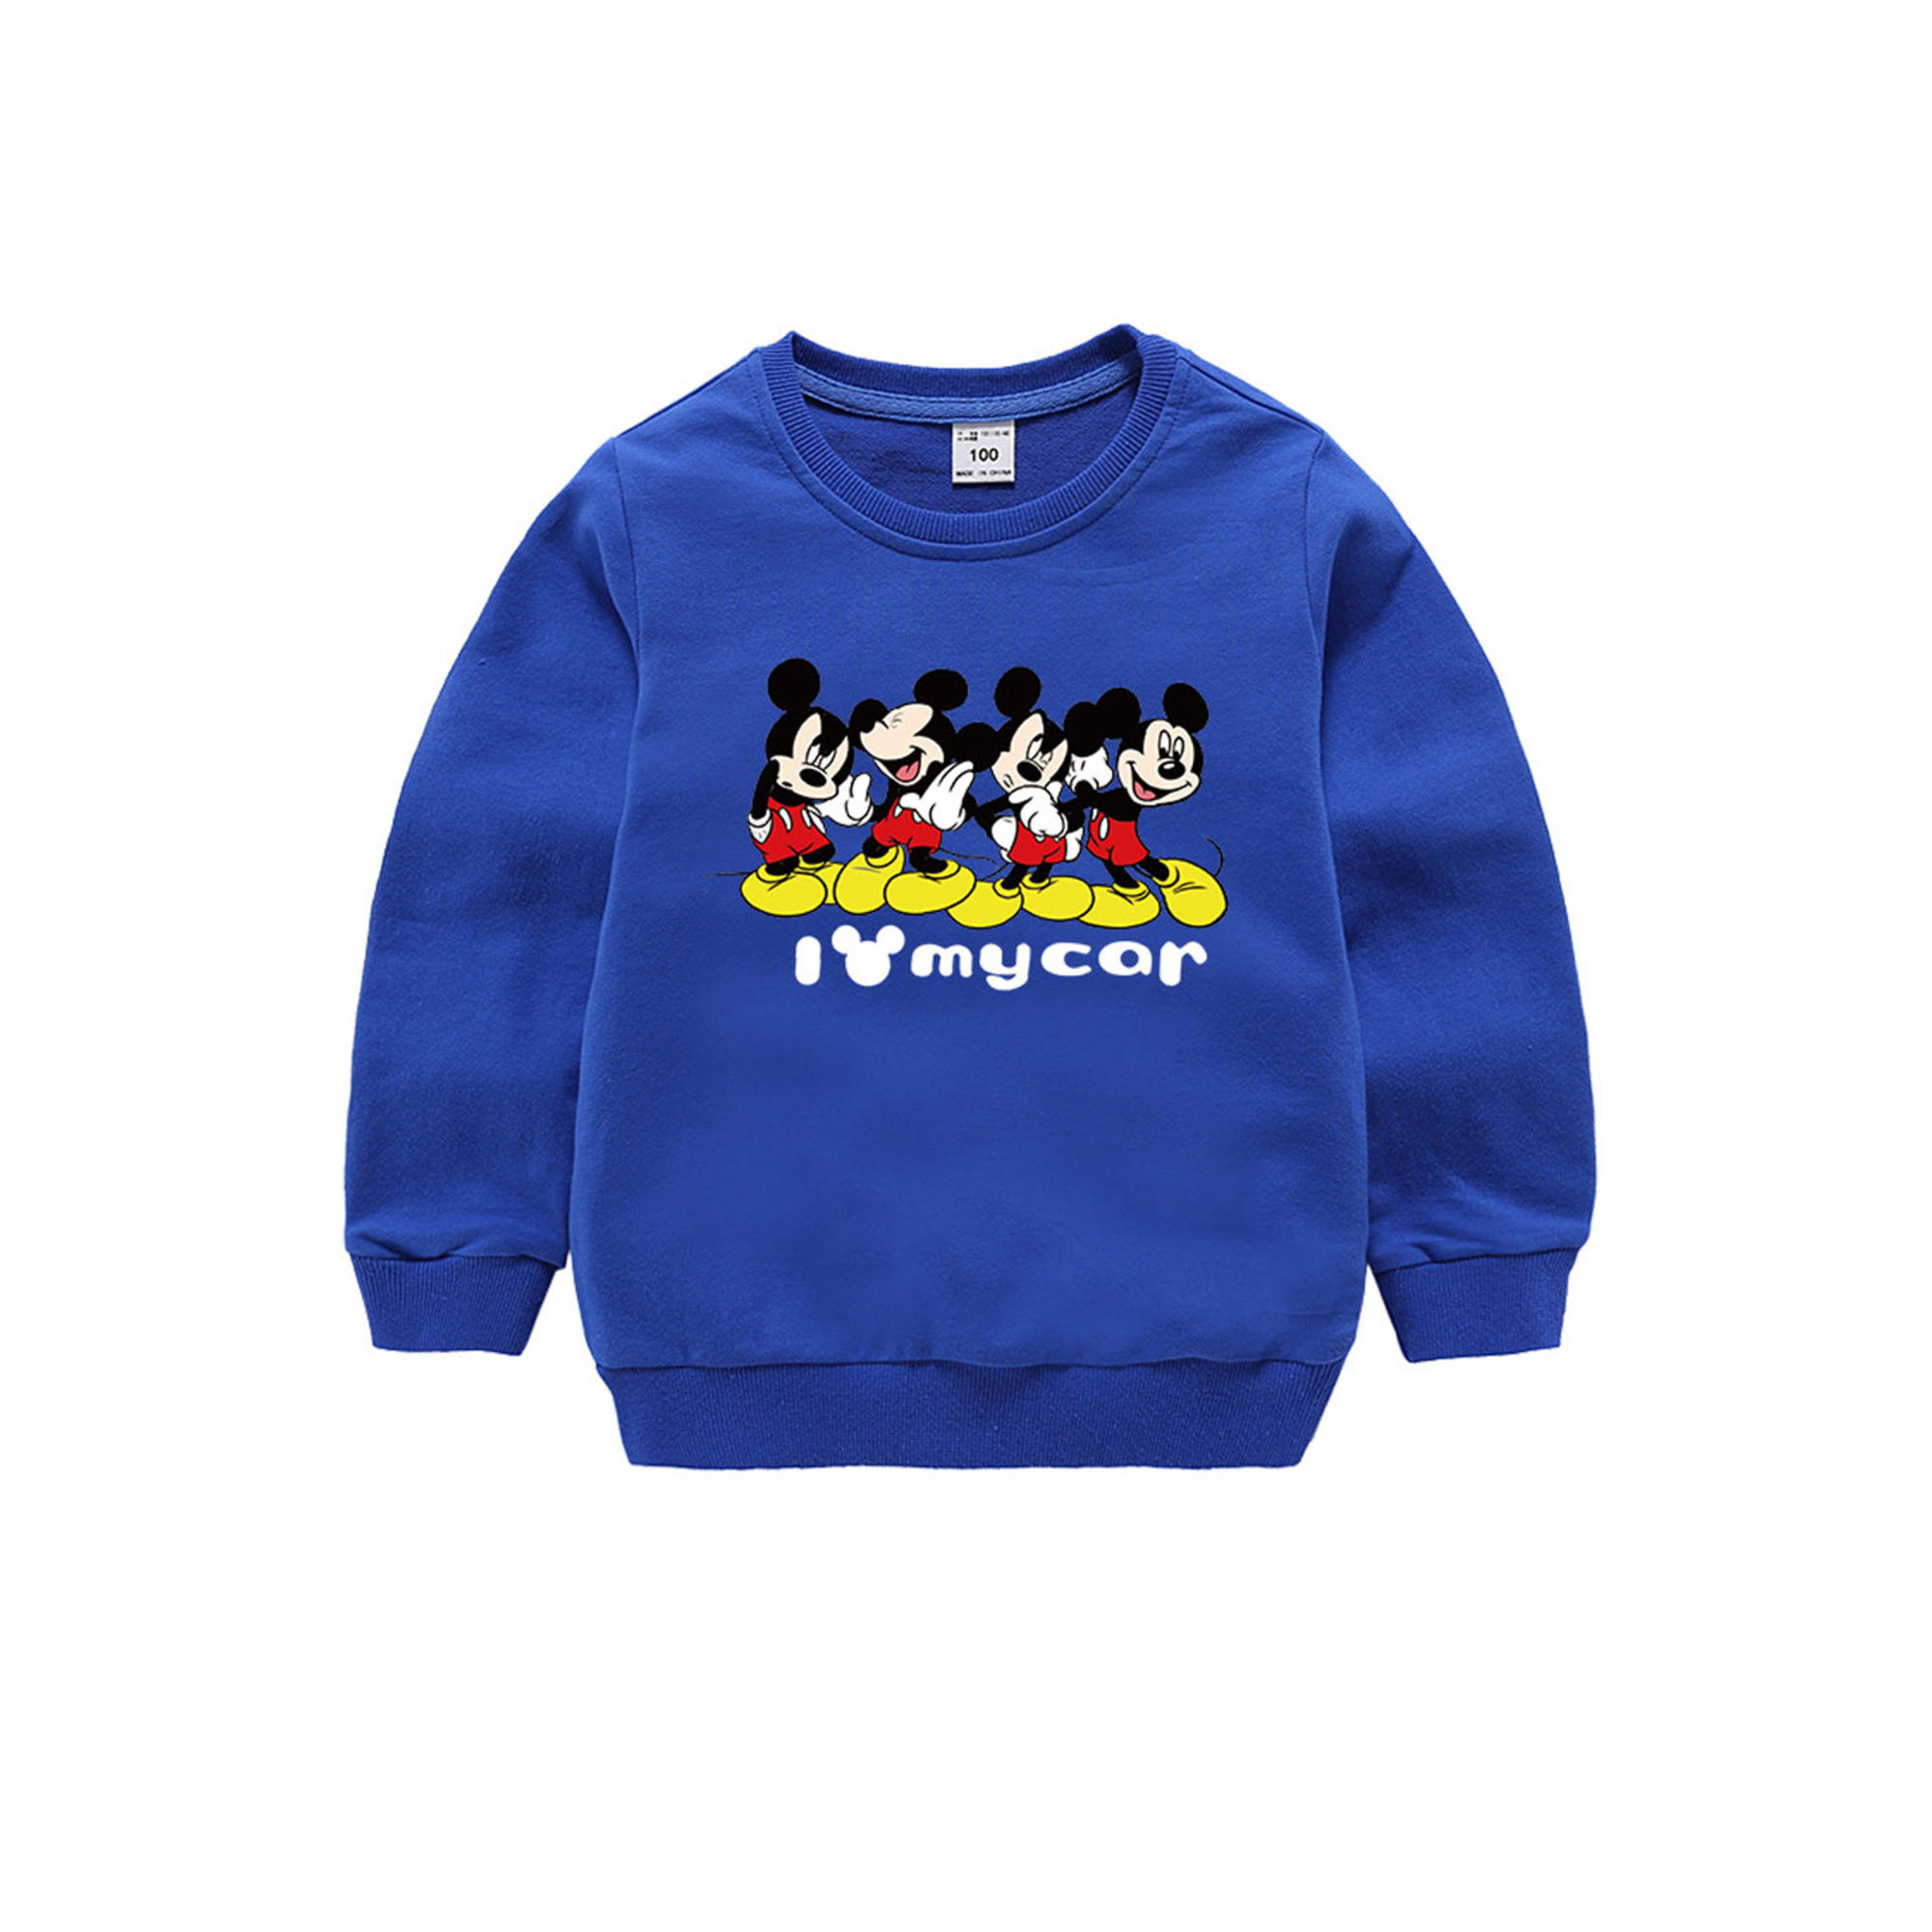 Tom Carry Toddler Baby Boys Mickey Mouse Warm Sweatshirt